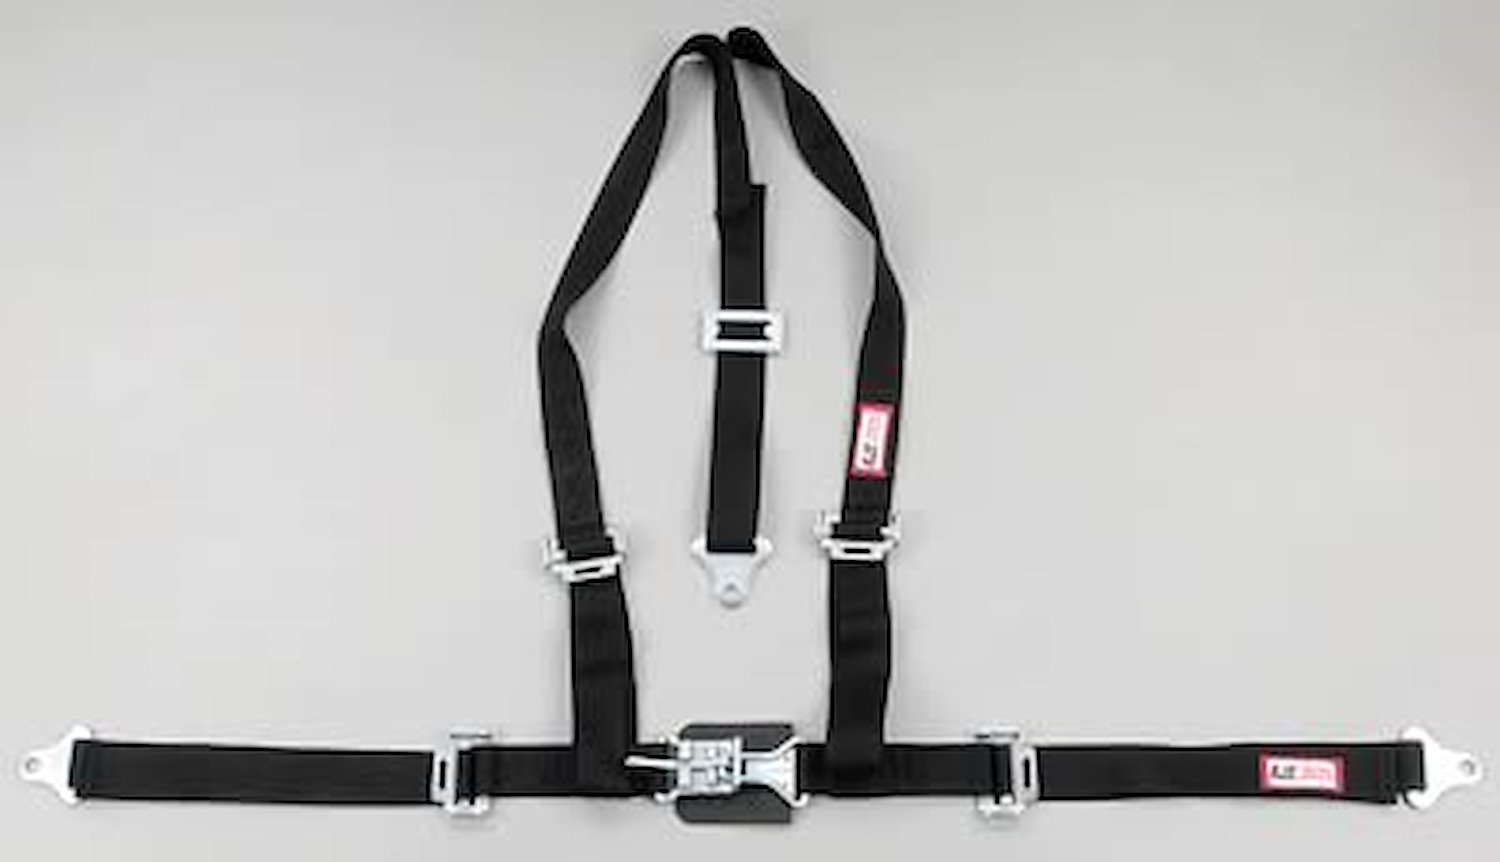 NON-SFI L&L HARNESS 3 PULL DOWN Lap Belt w/adjuster SNAP 2 S.H. Individual FLOOR Mount WRAP/BOLT RED